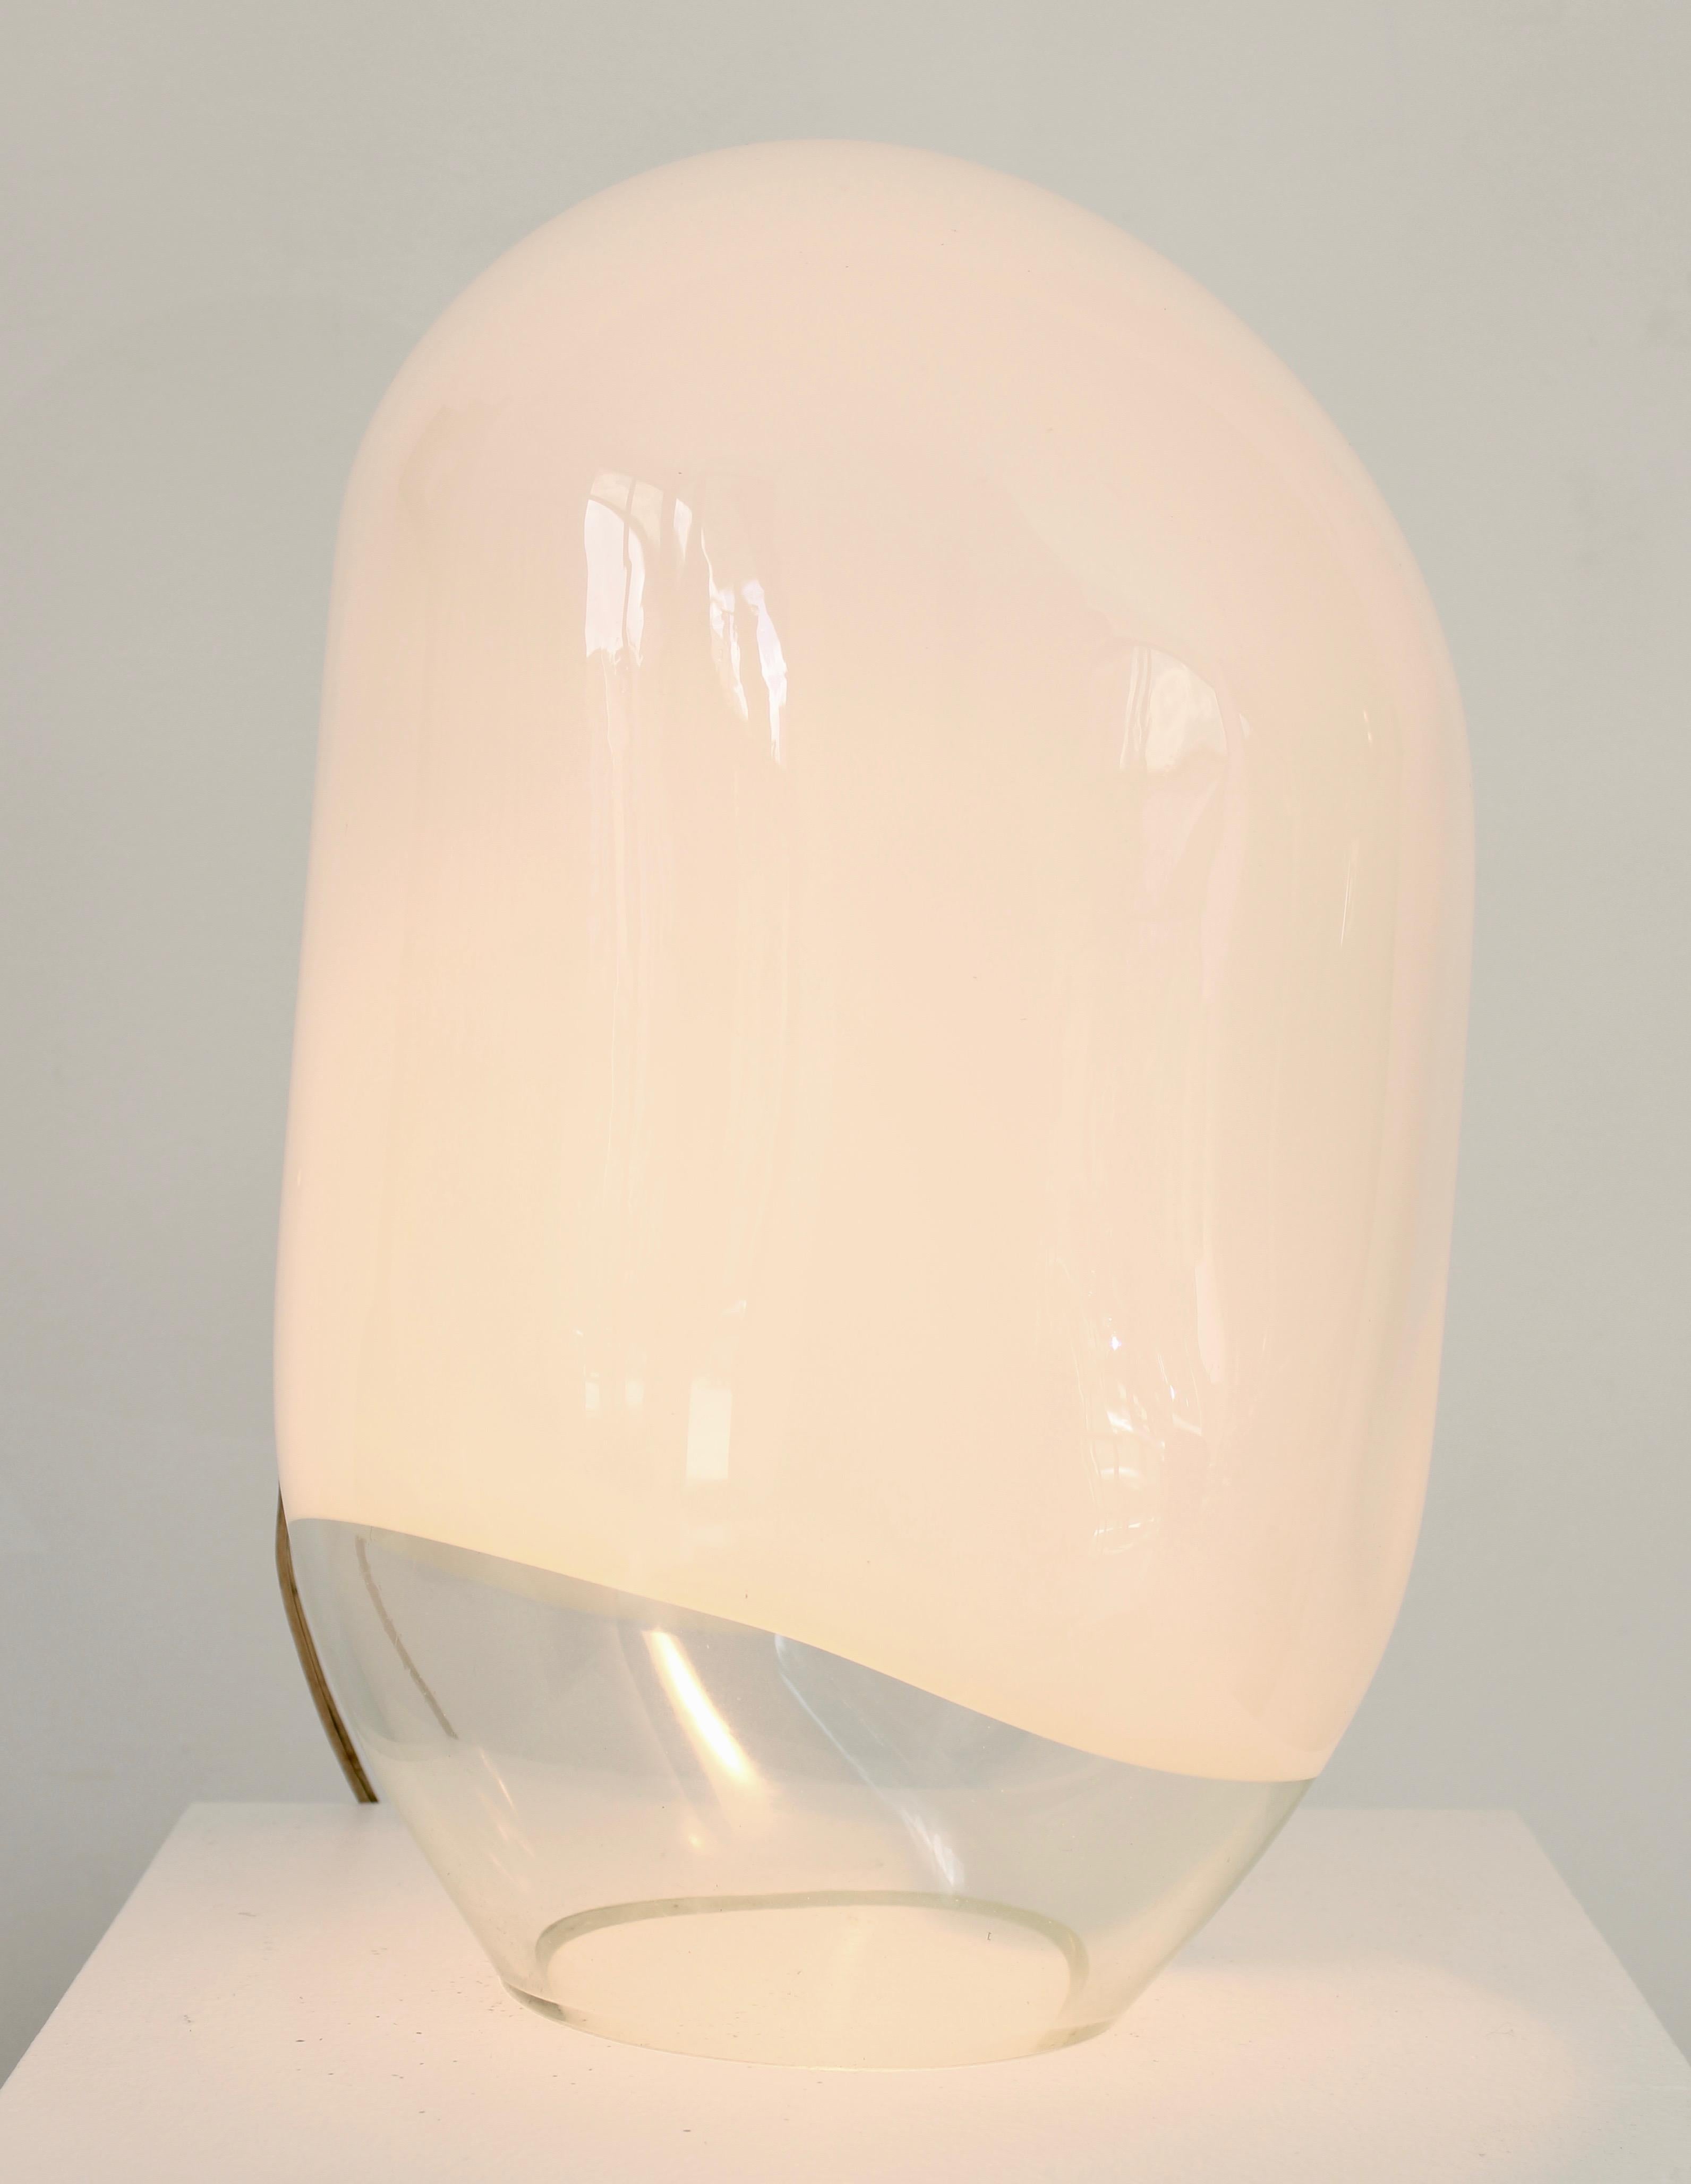 Gino Vistosi Italian Murano blown glass table lamp Munega model circa 1978.
This unusual example has a clear bottom and the opaque glass terminating at a clear section.
Vistosi label intact with original cord and switch but new socket.
Perfect